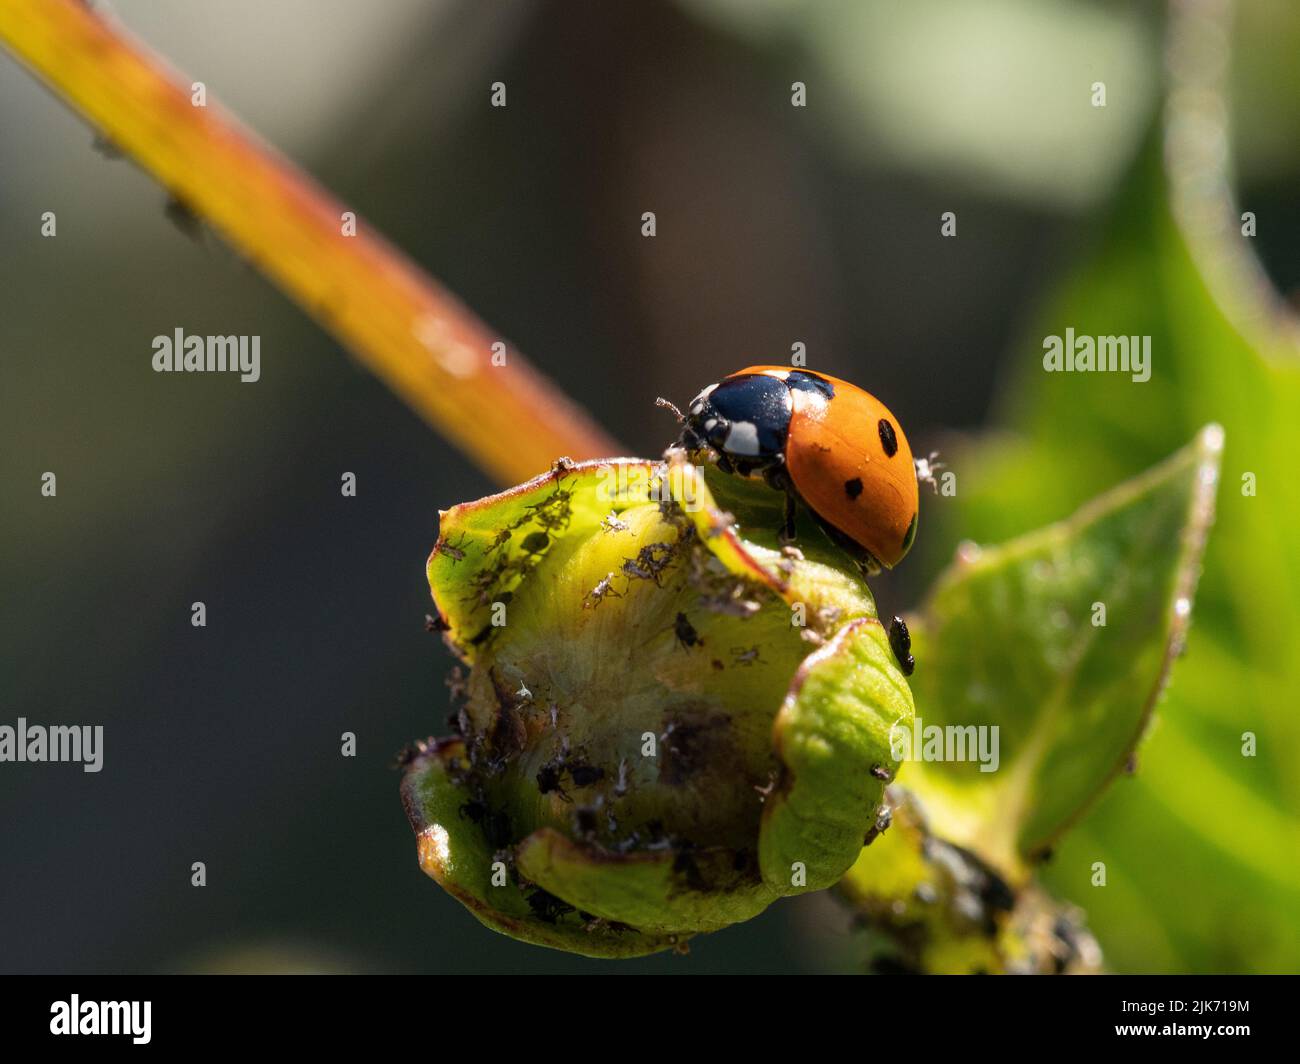 A ladybird feeding on black aphids infesting a Dahlia stem and bud. Stock Photo